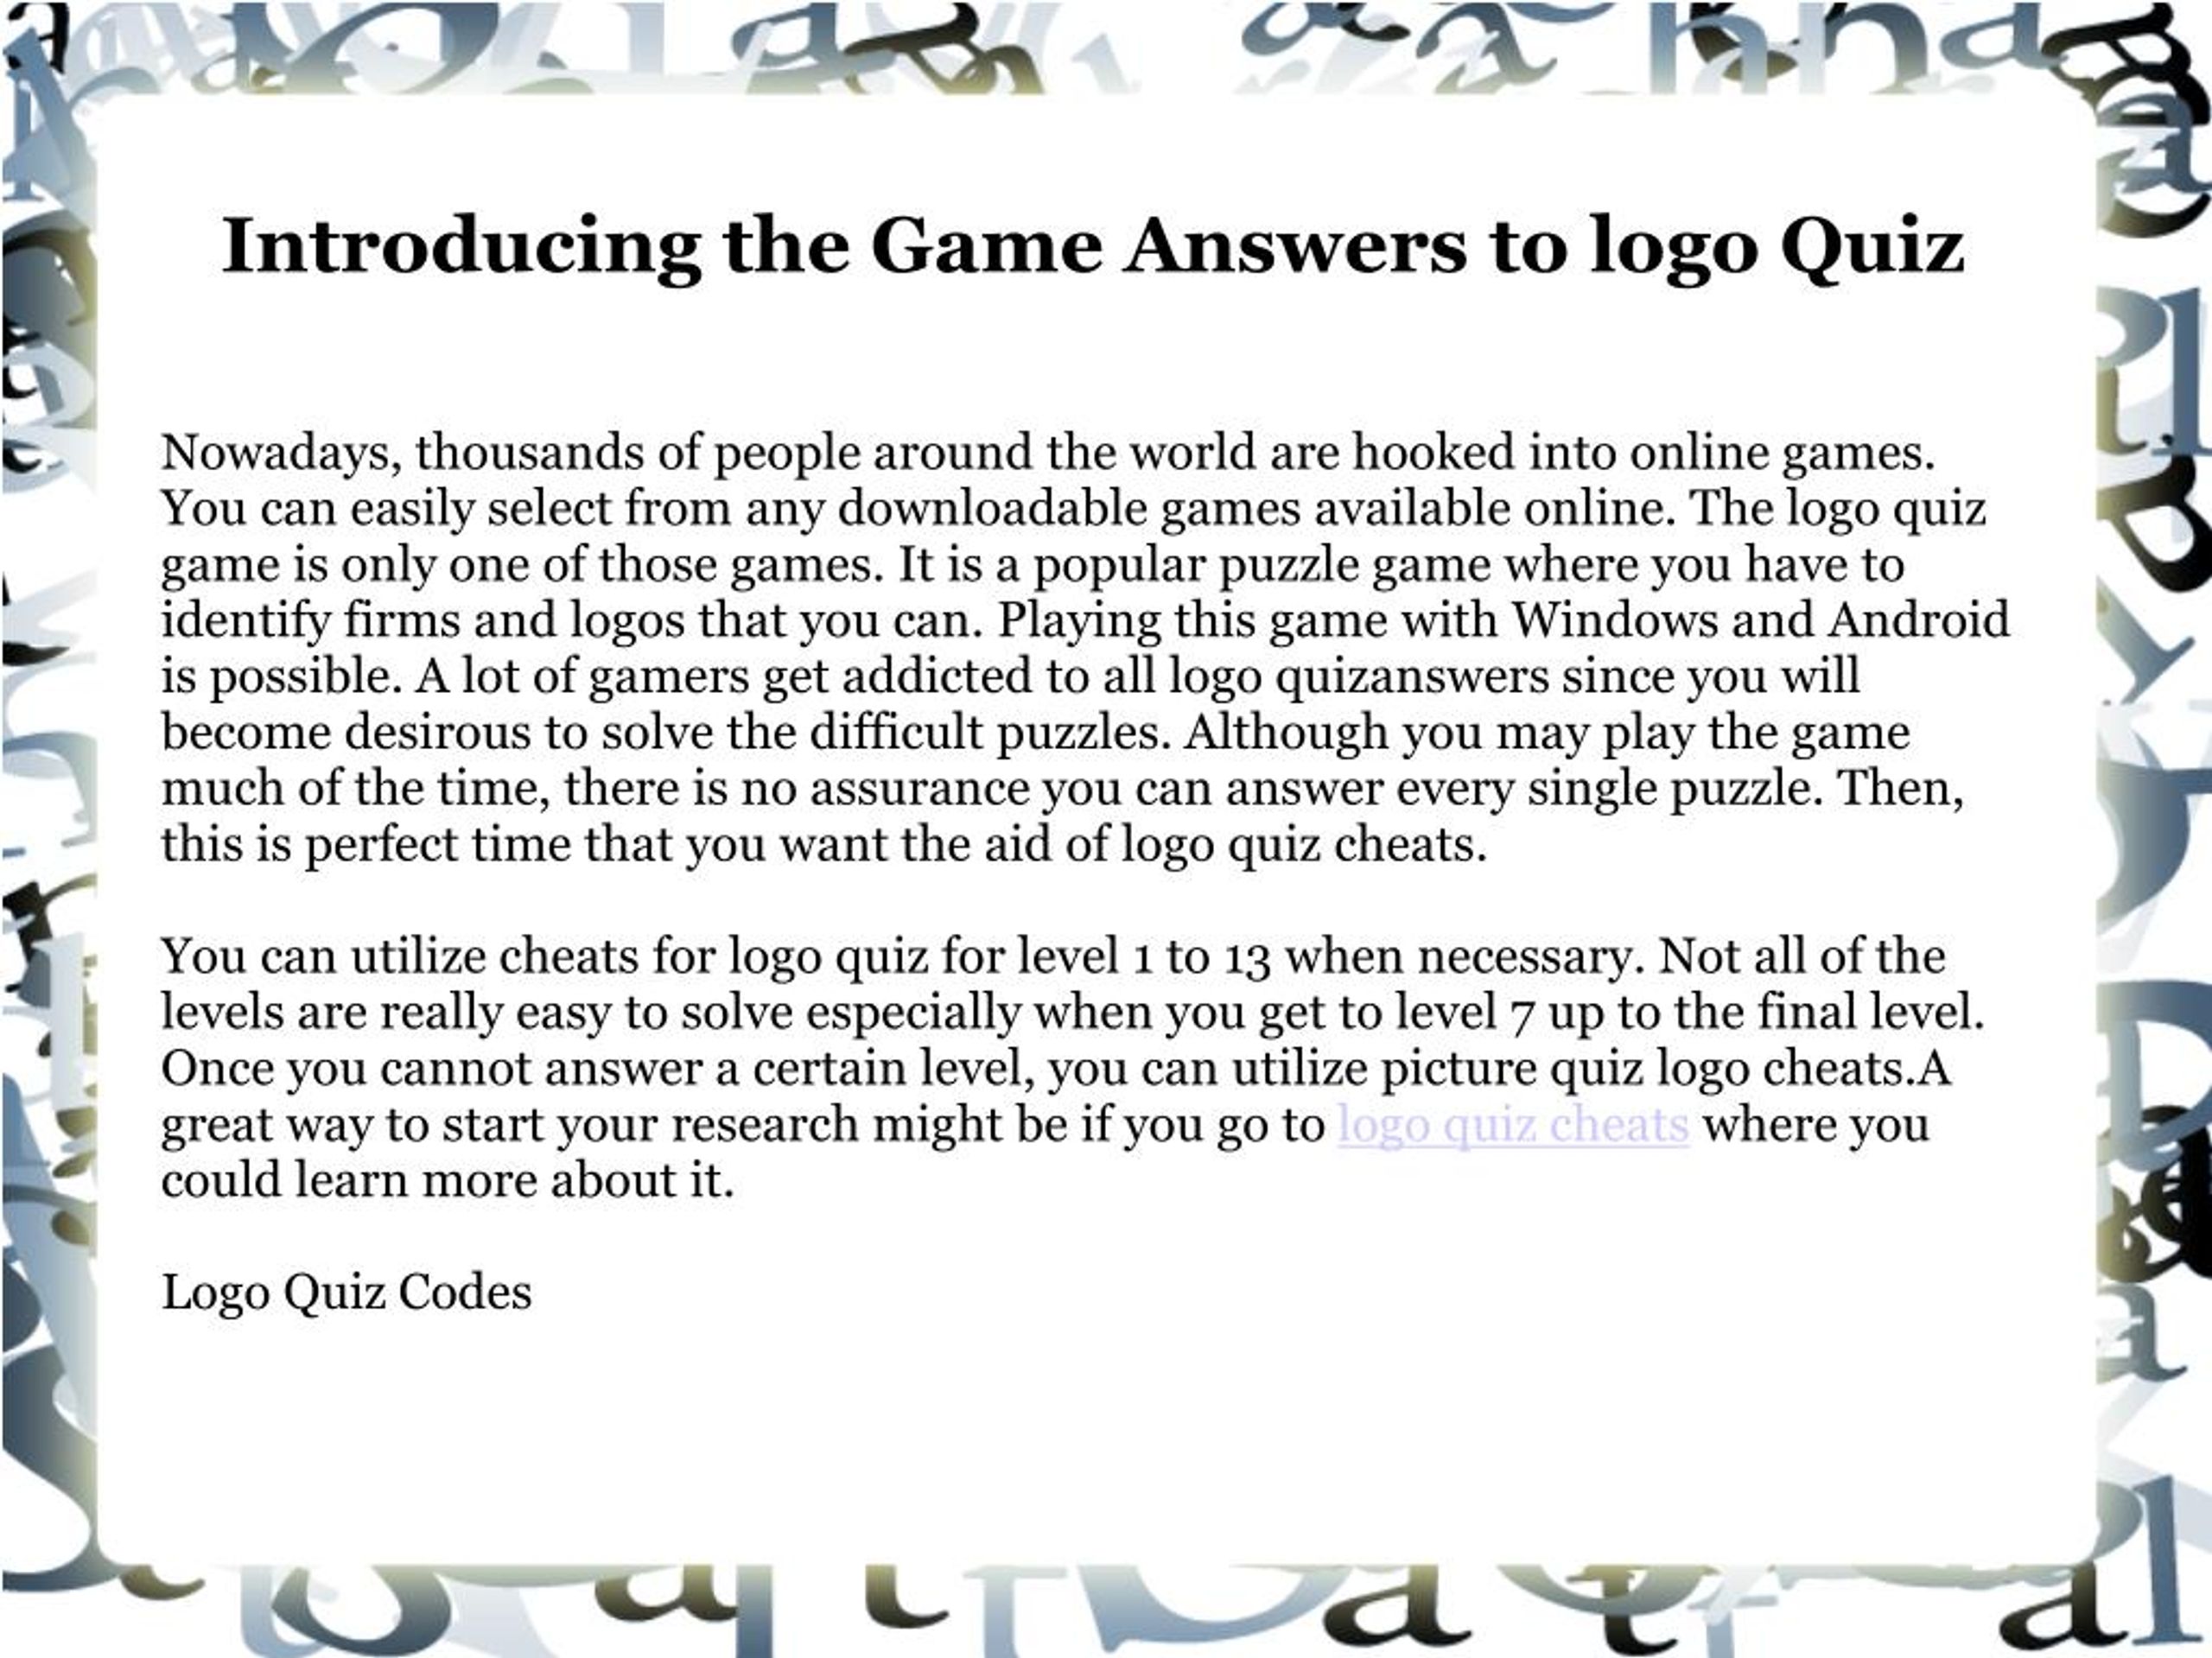 The Logos Quiz Game: Why The Top Free iPad Game This Week is Worth a Fortune